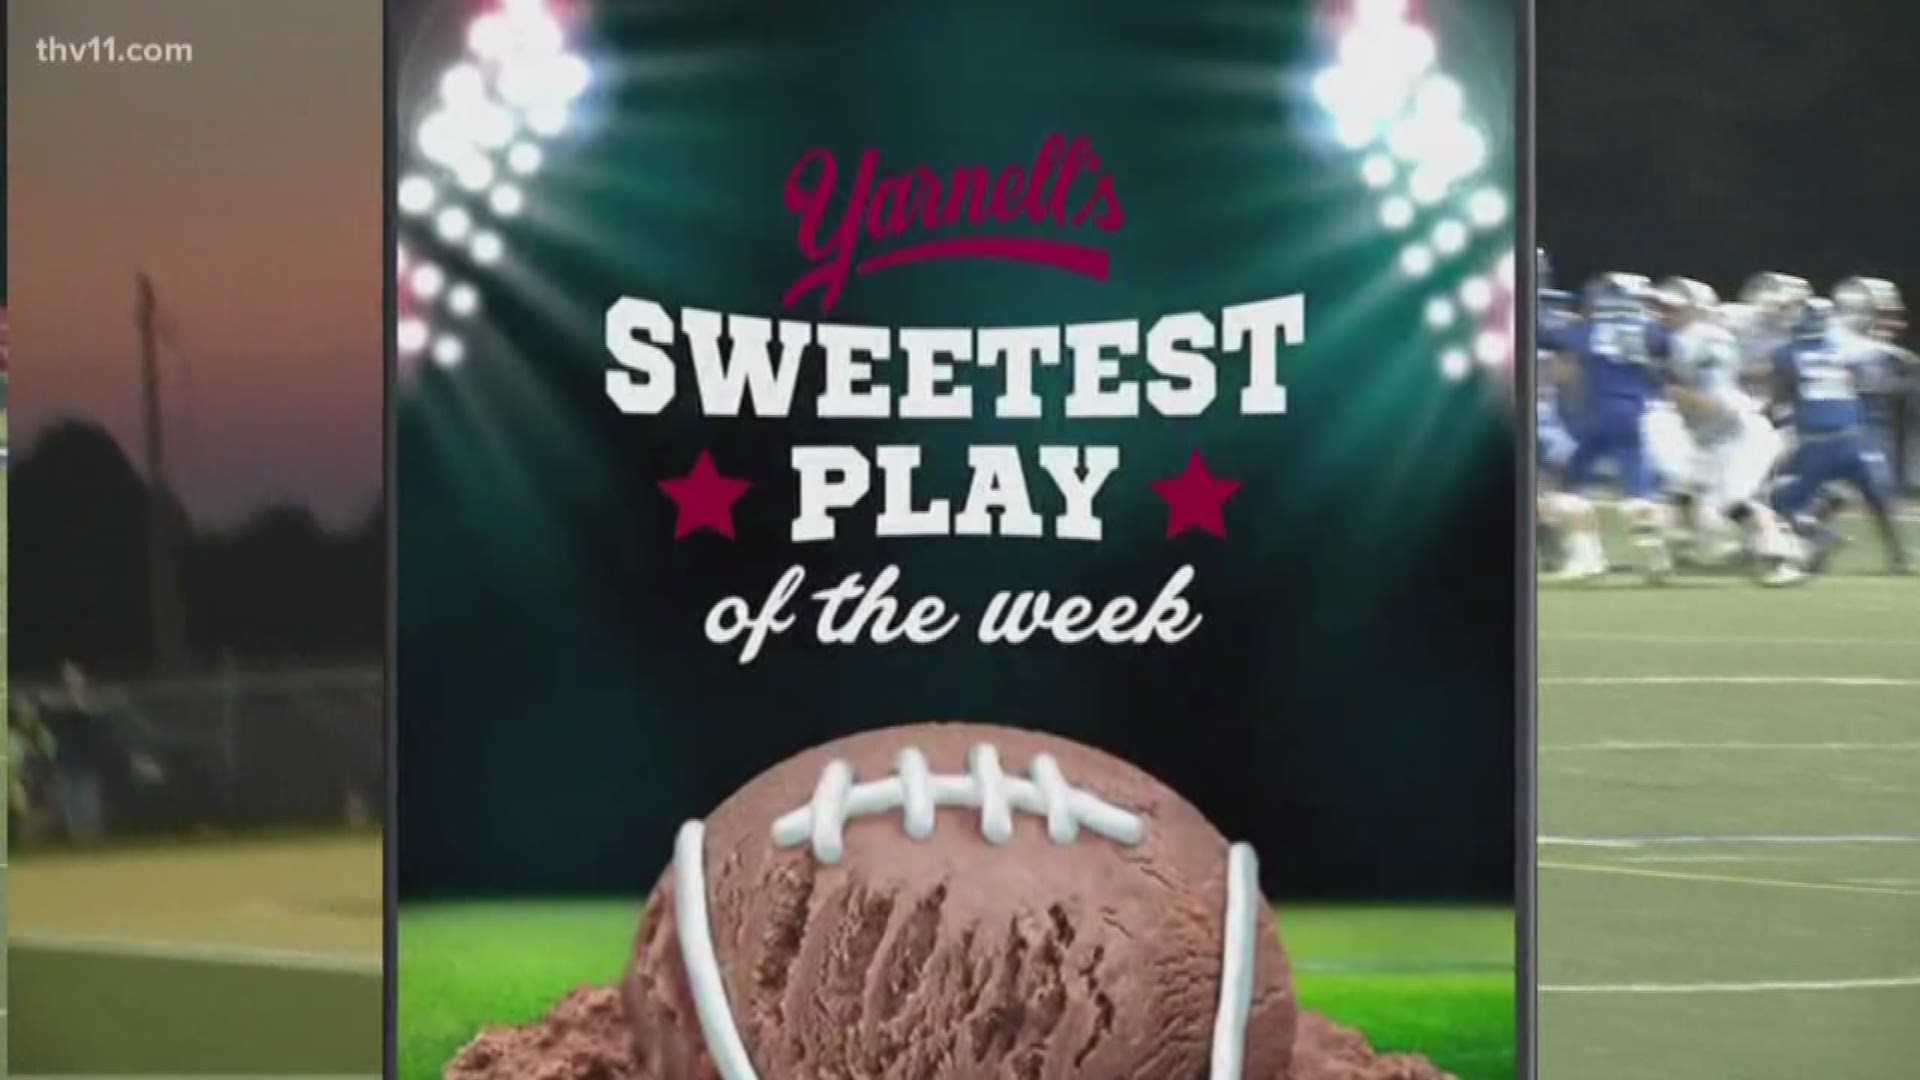 Week two of the high school football season full of crazy good plays. But you know there can only be one, who had the sweetest play in central Arkansas? Here are the nominees for Yarnell's Sweetest Play of the Week!